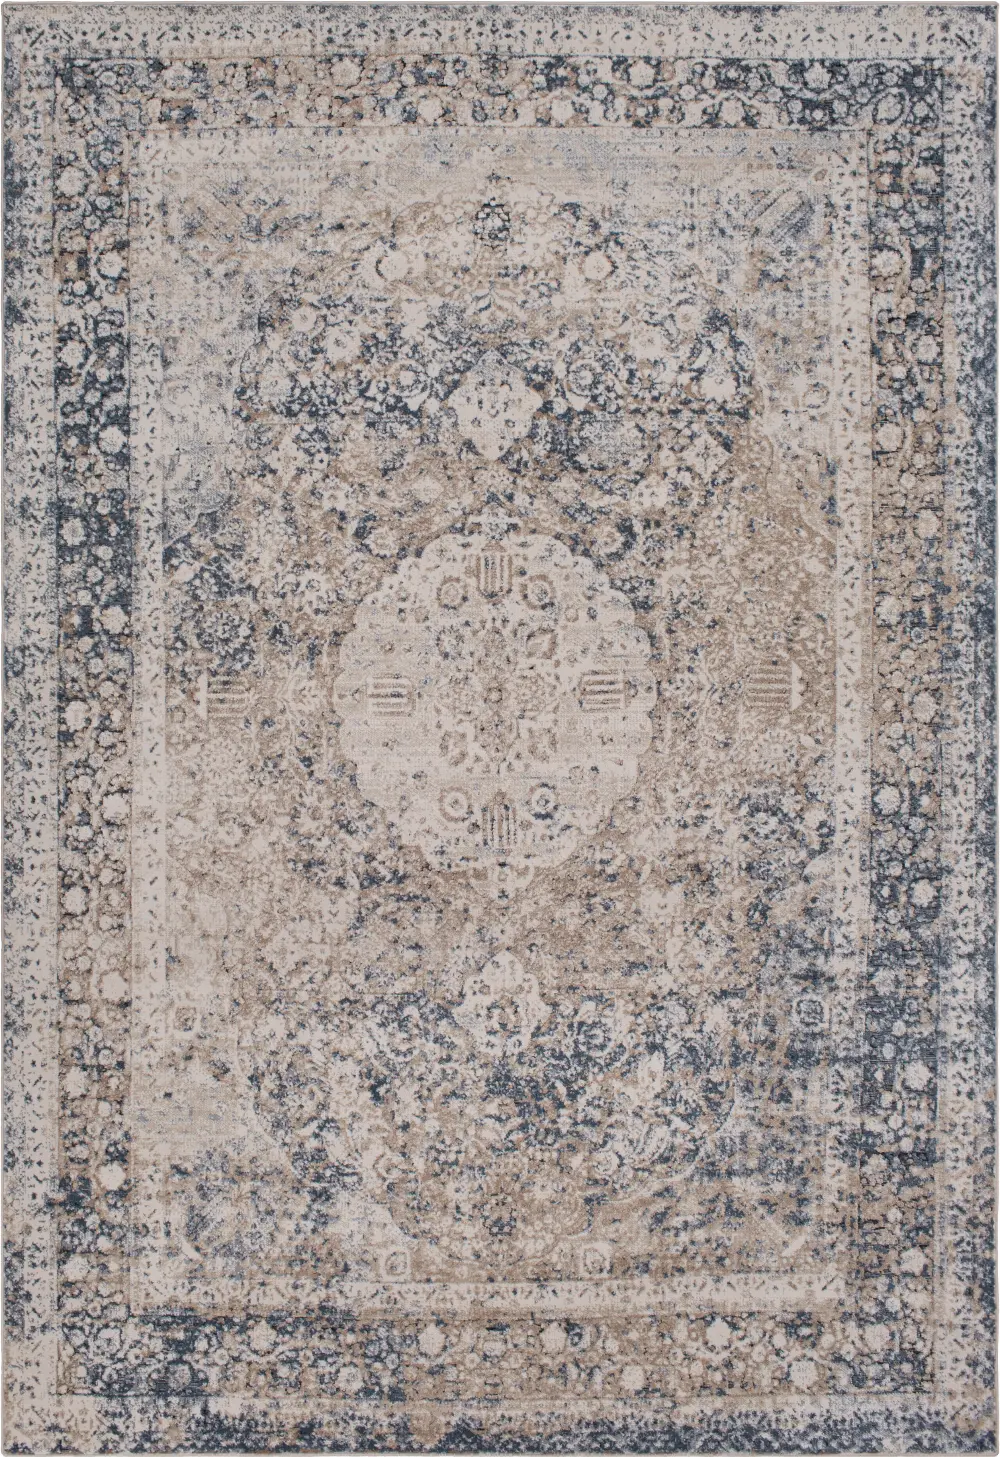 5 x 7 Medium Taupe and Charcoal Gray Area Rug - Durham-1